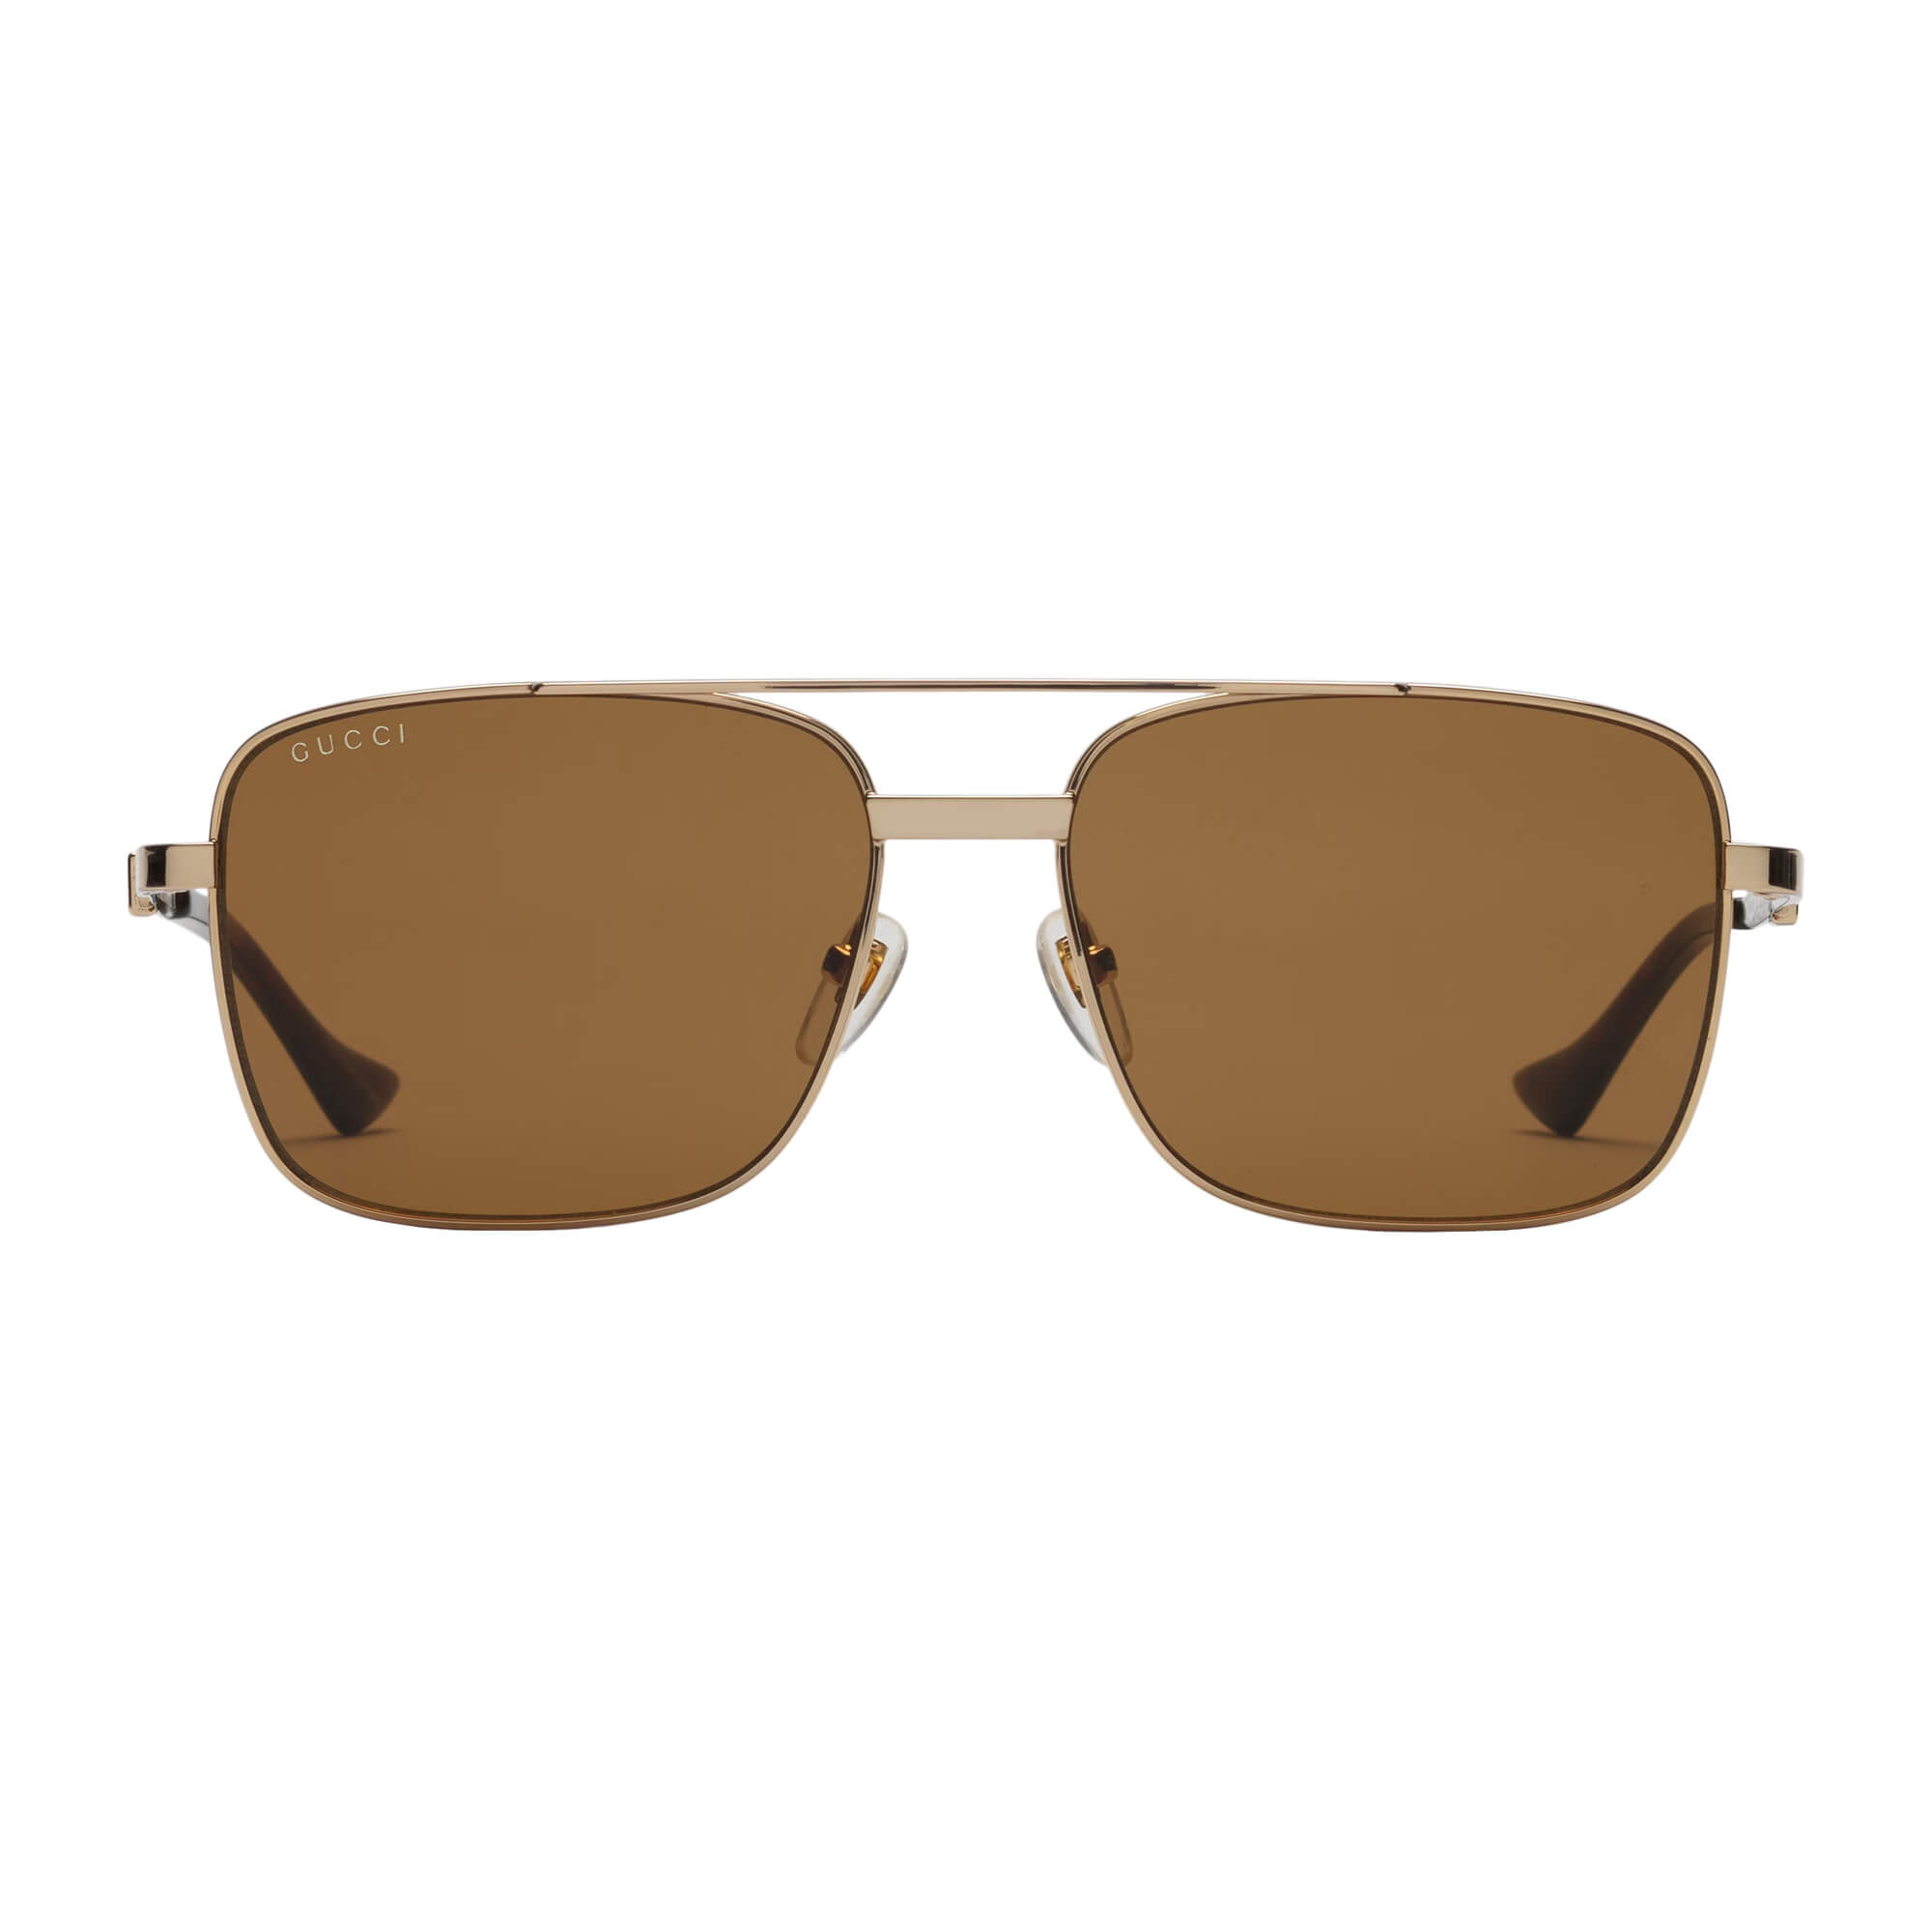 NS1009BRFBRL PC Brown Frame with Brown Glass Lens Sunglasses